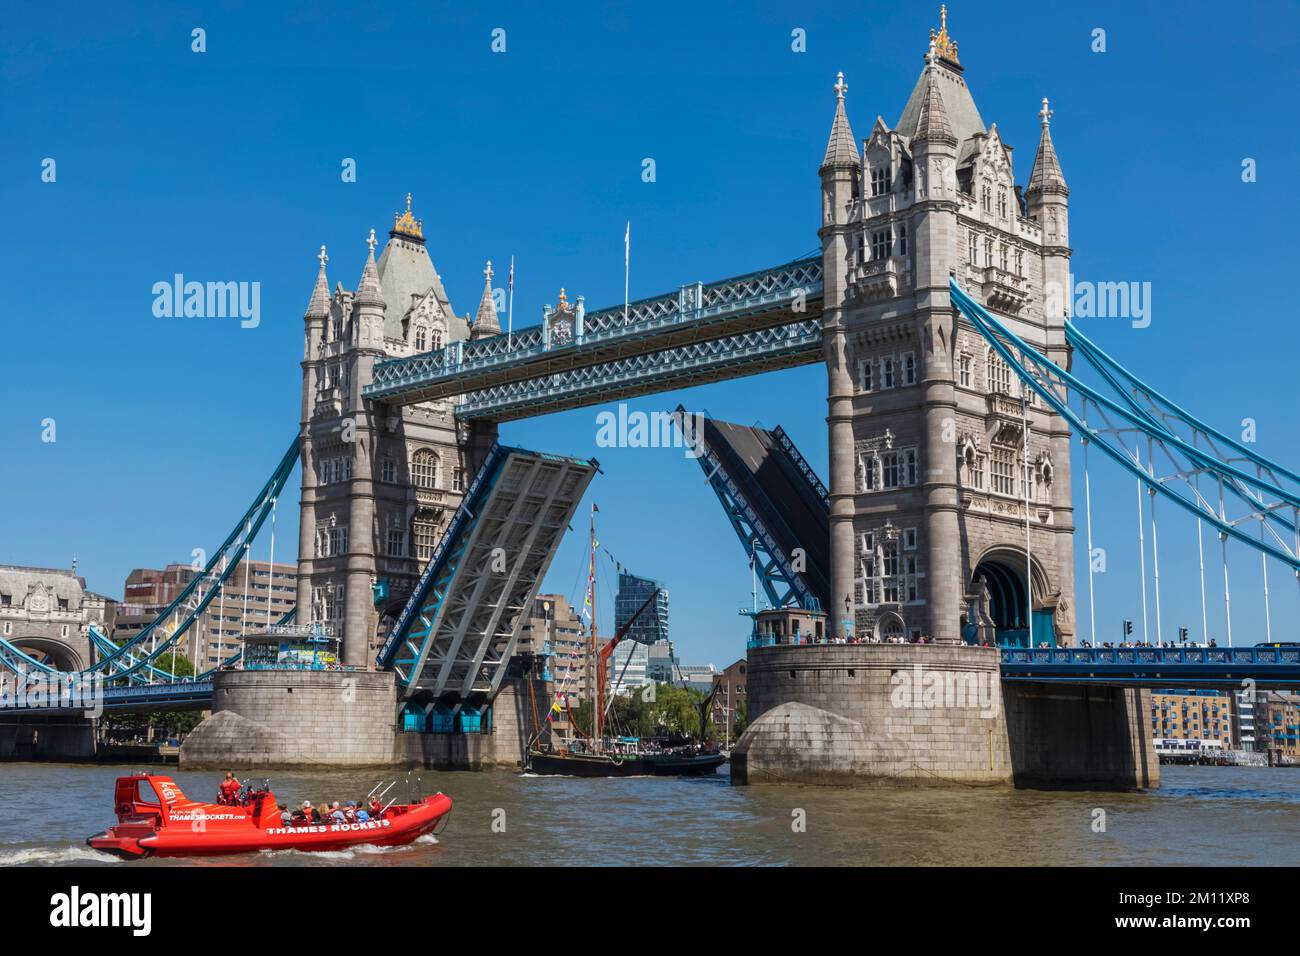 Tower Bridge Open with Historic Barge Passing Through, London, England Stock Photo